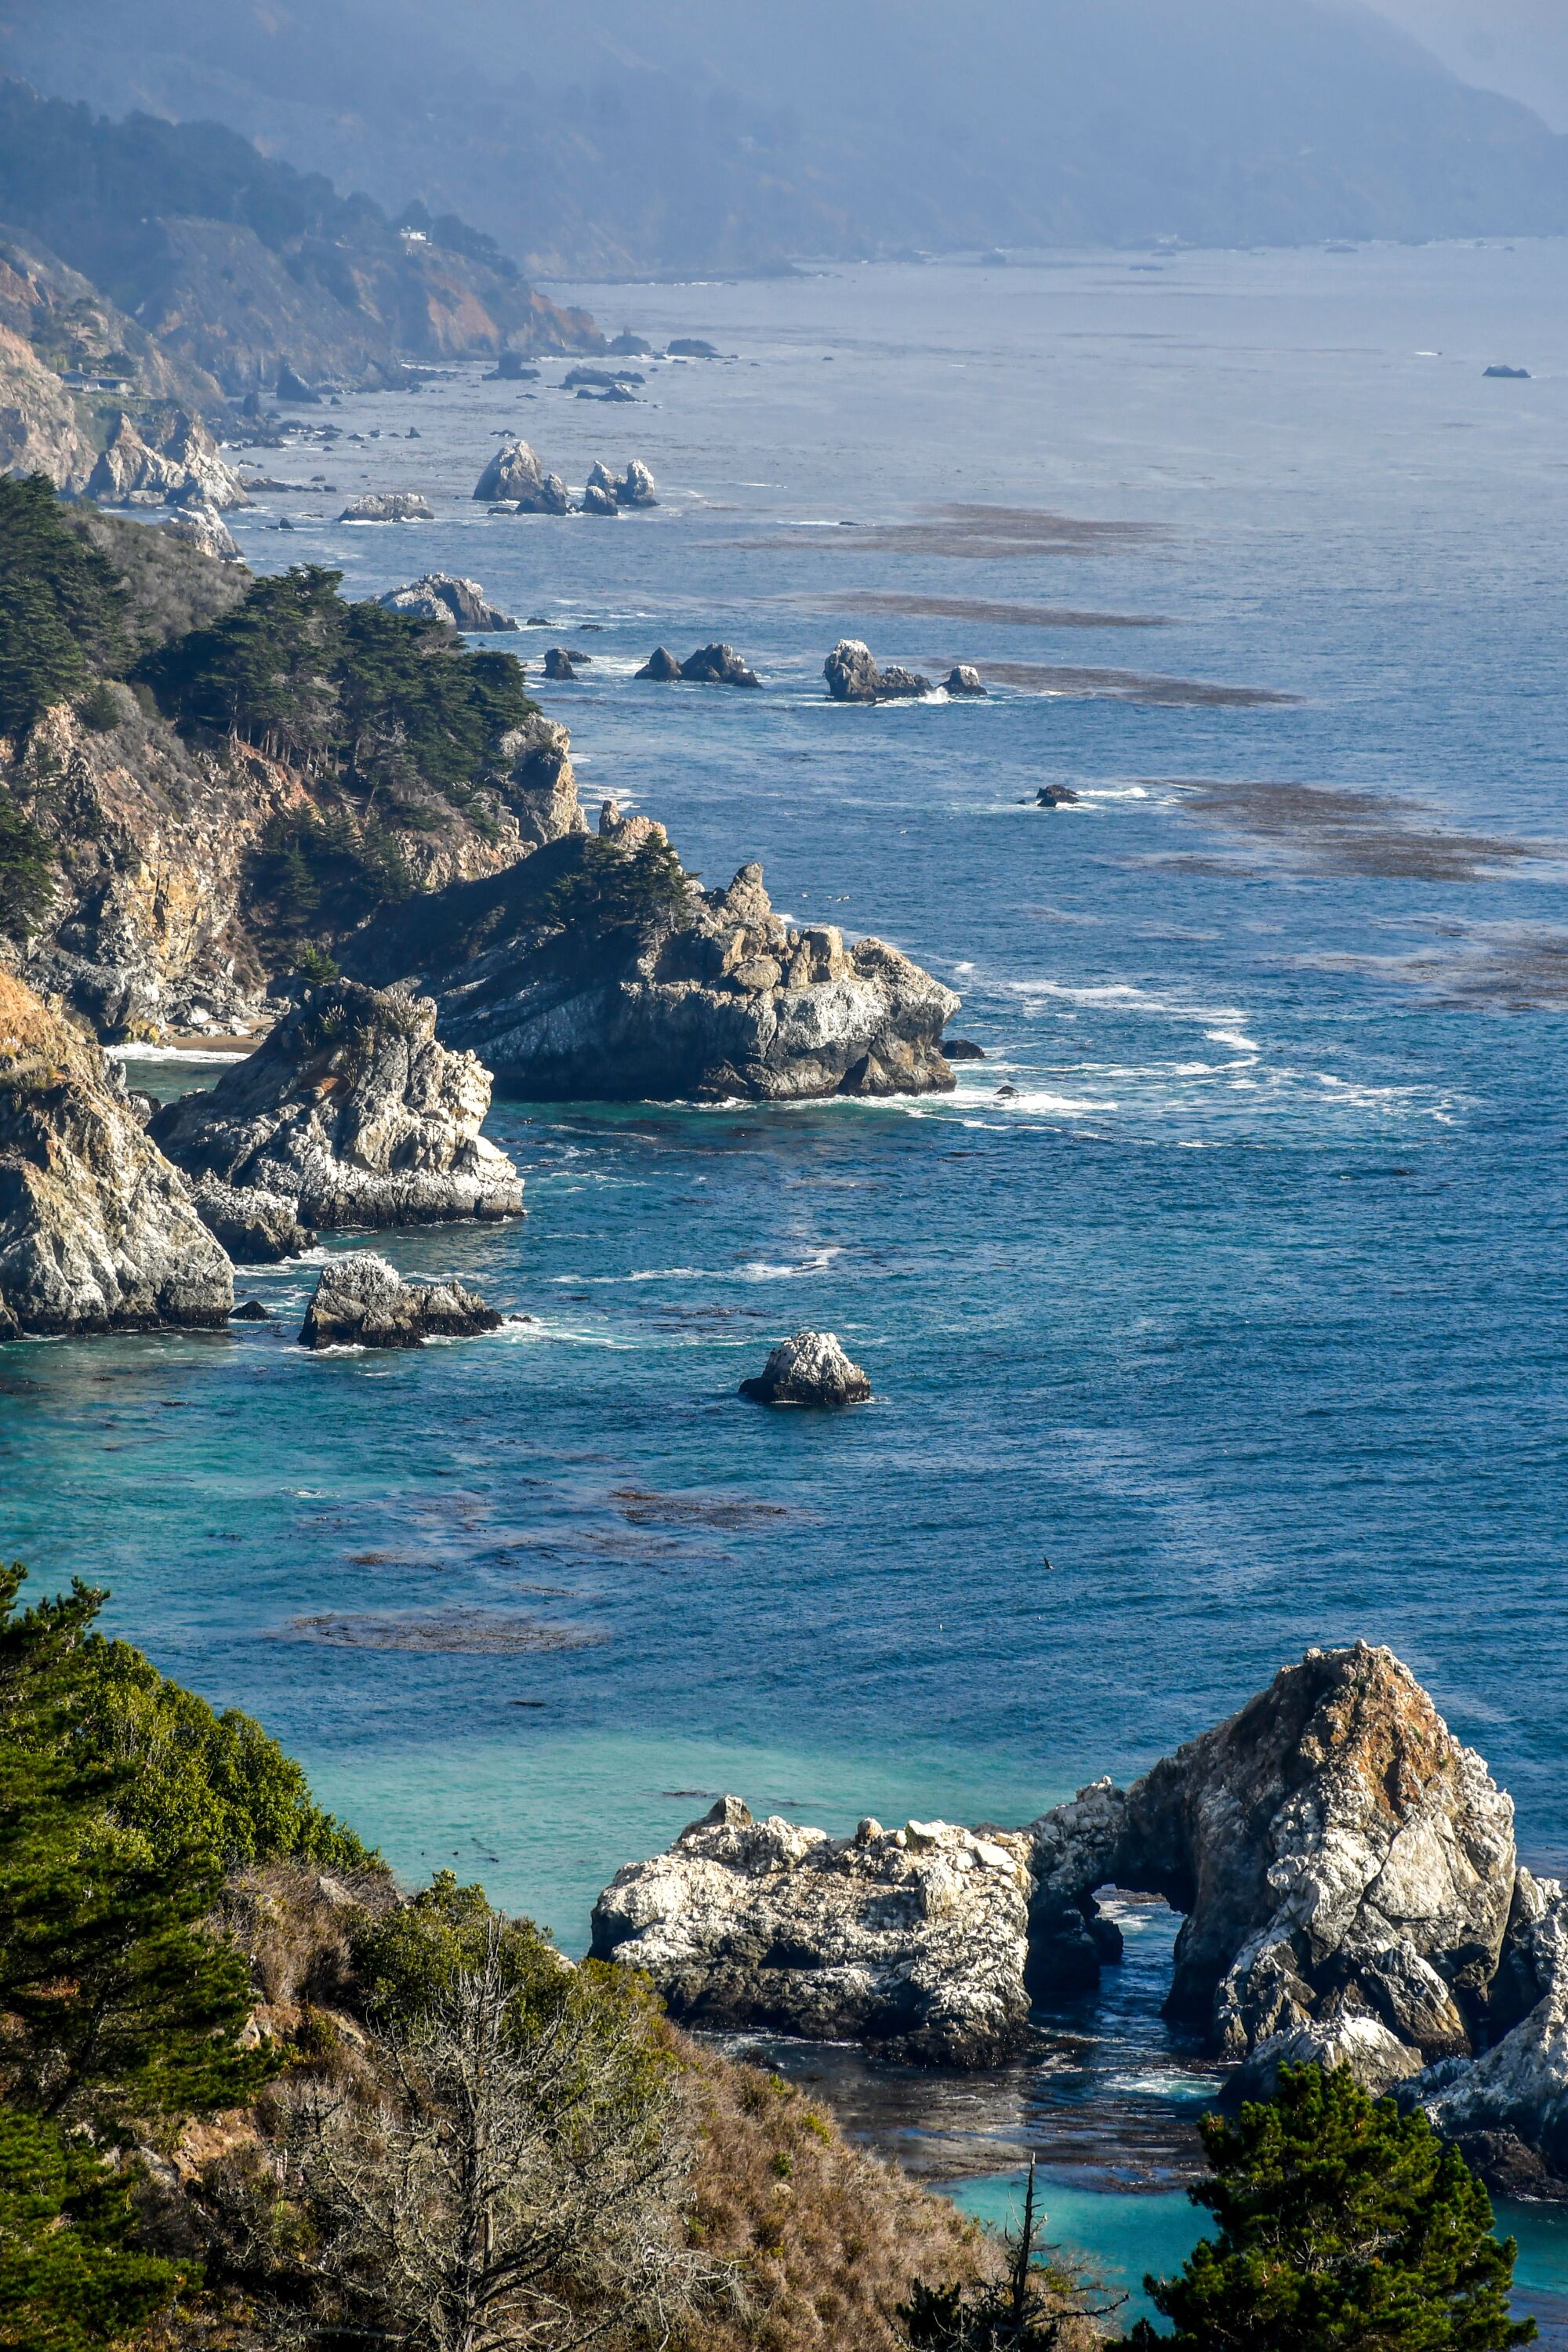 These coastal views are along Highway 1 in the South Coast area of Big Sur, north of Lucia.